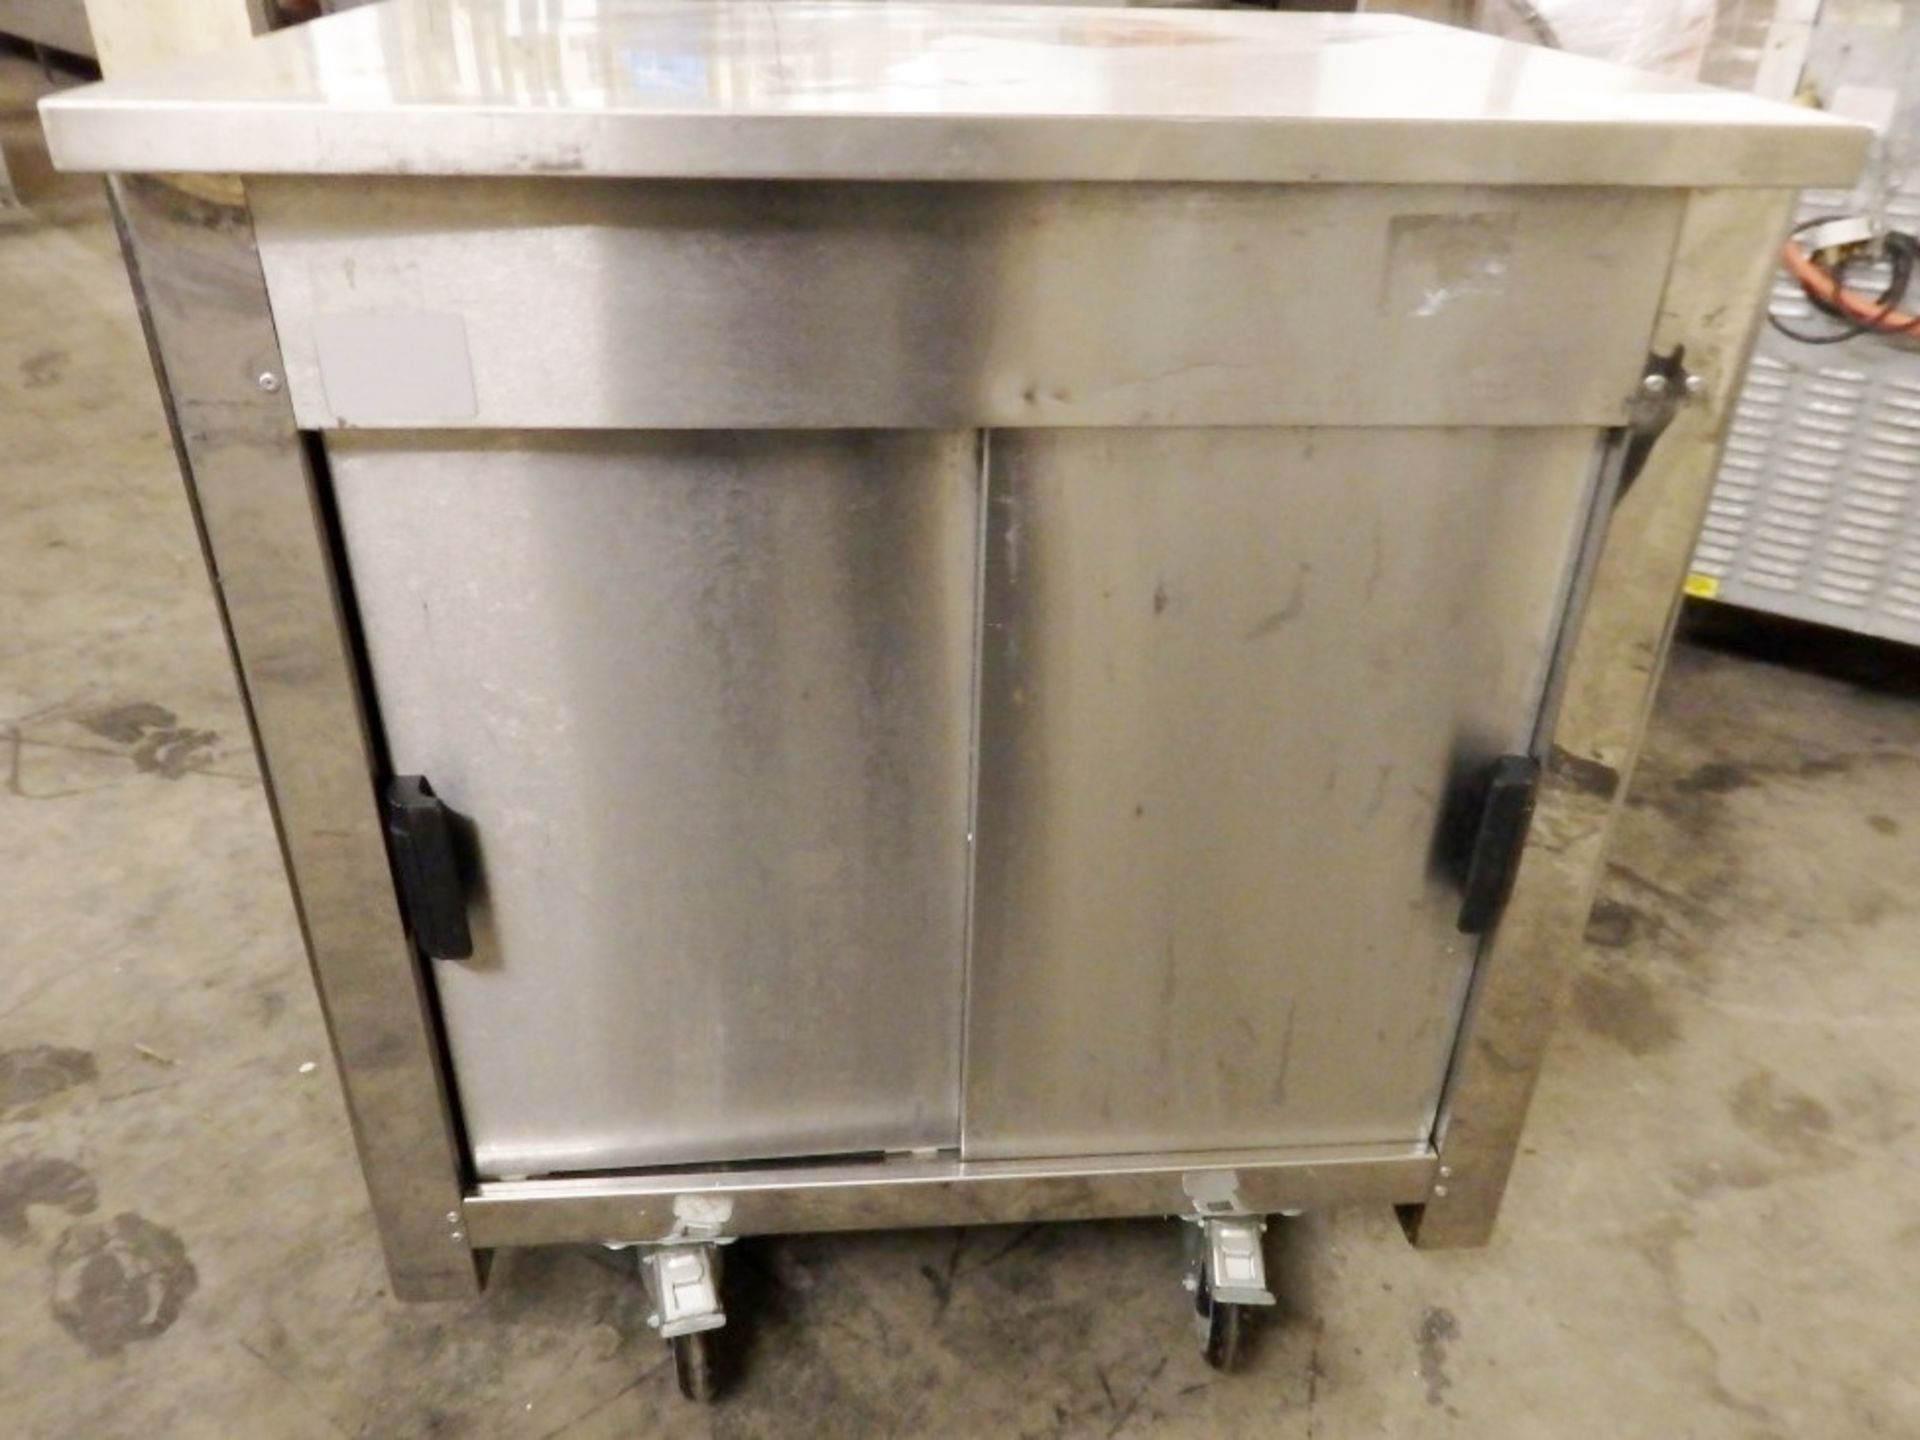 1 x Serving Counter With Storage - On Castors For Maneuverability - Ideal For Pub Carvery, Canteens, - Image 5 of 8